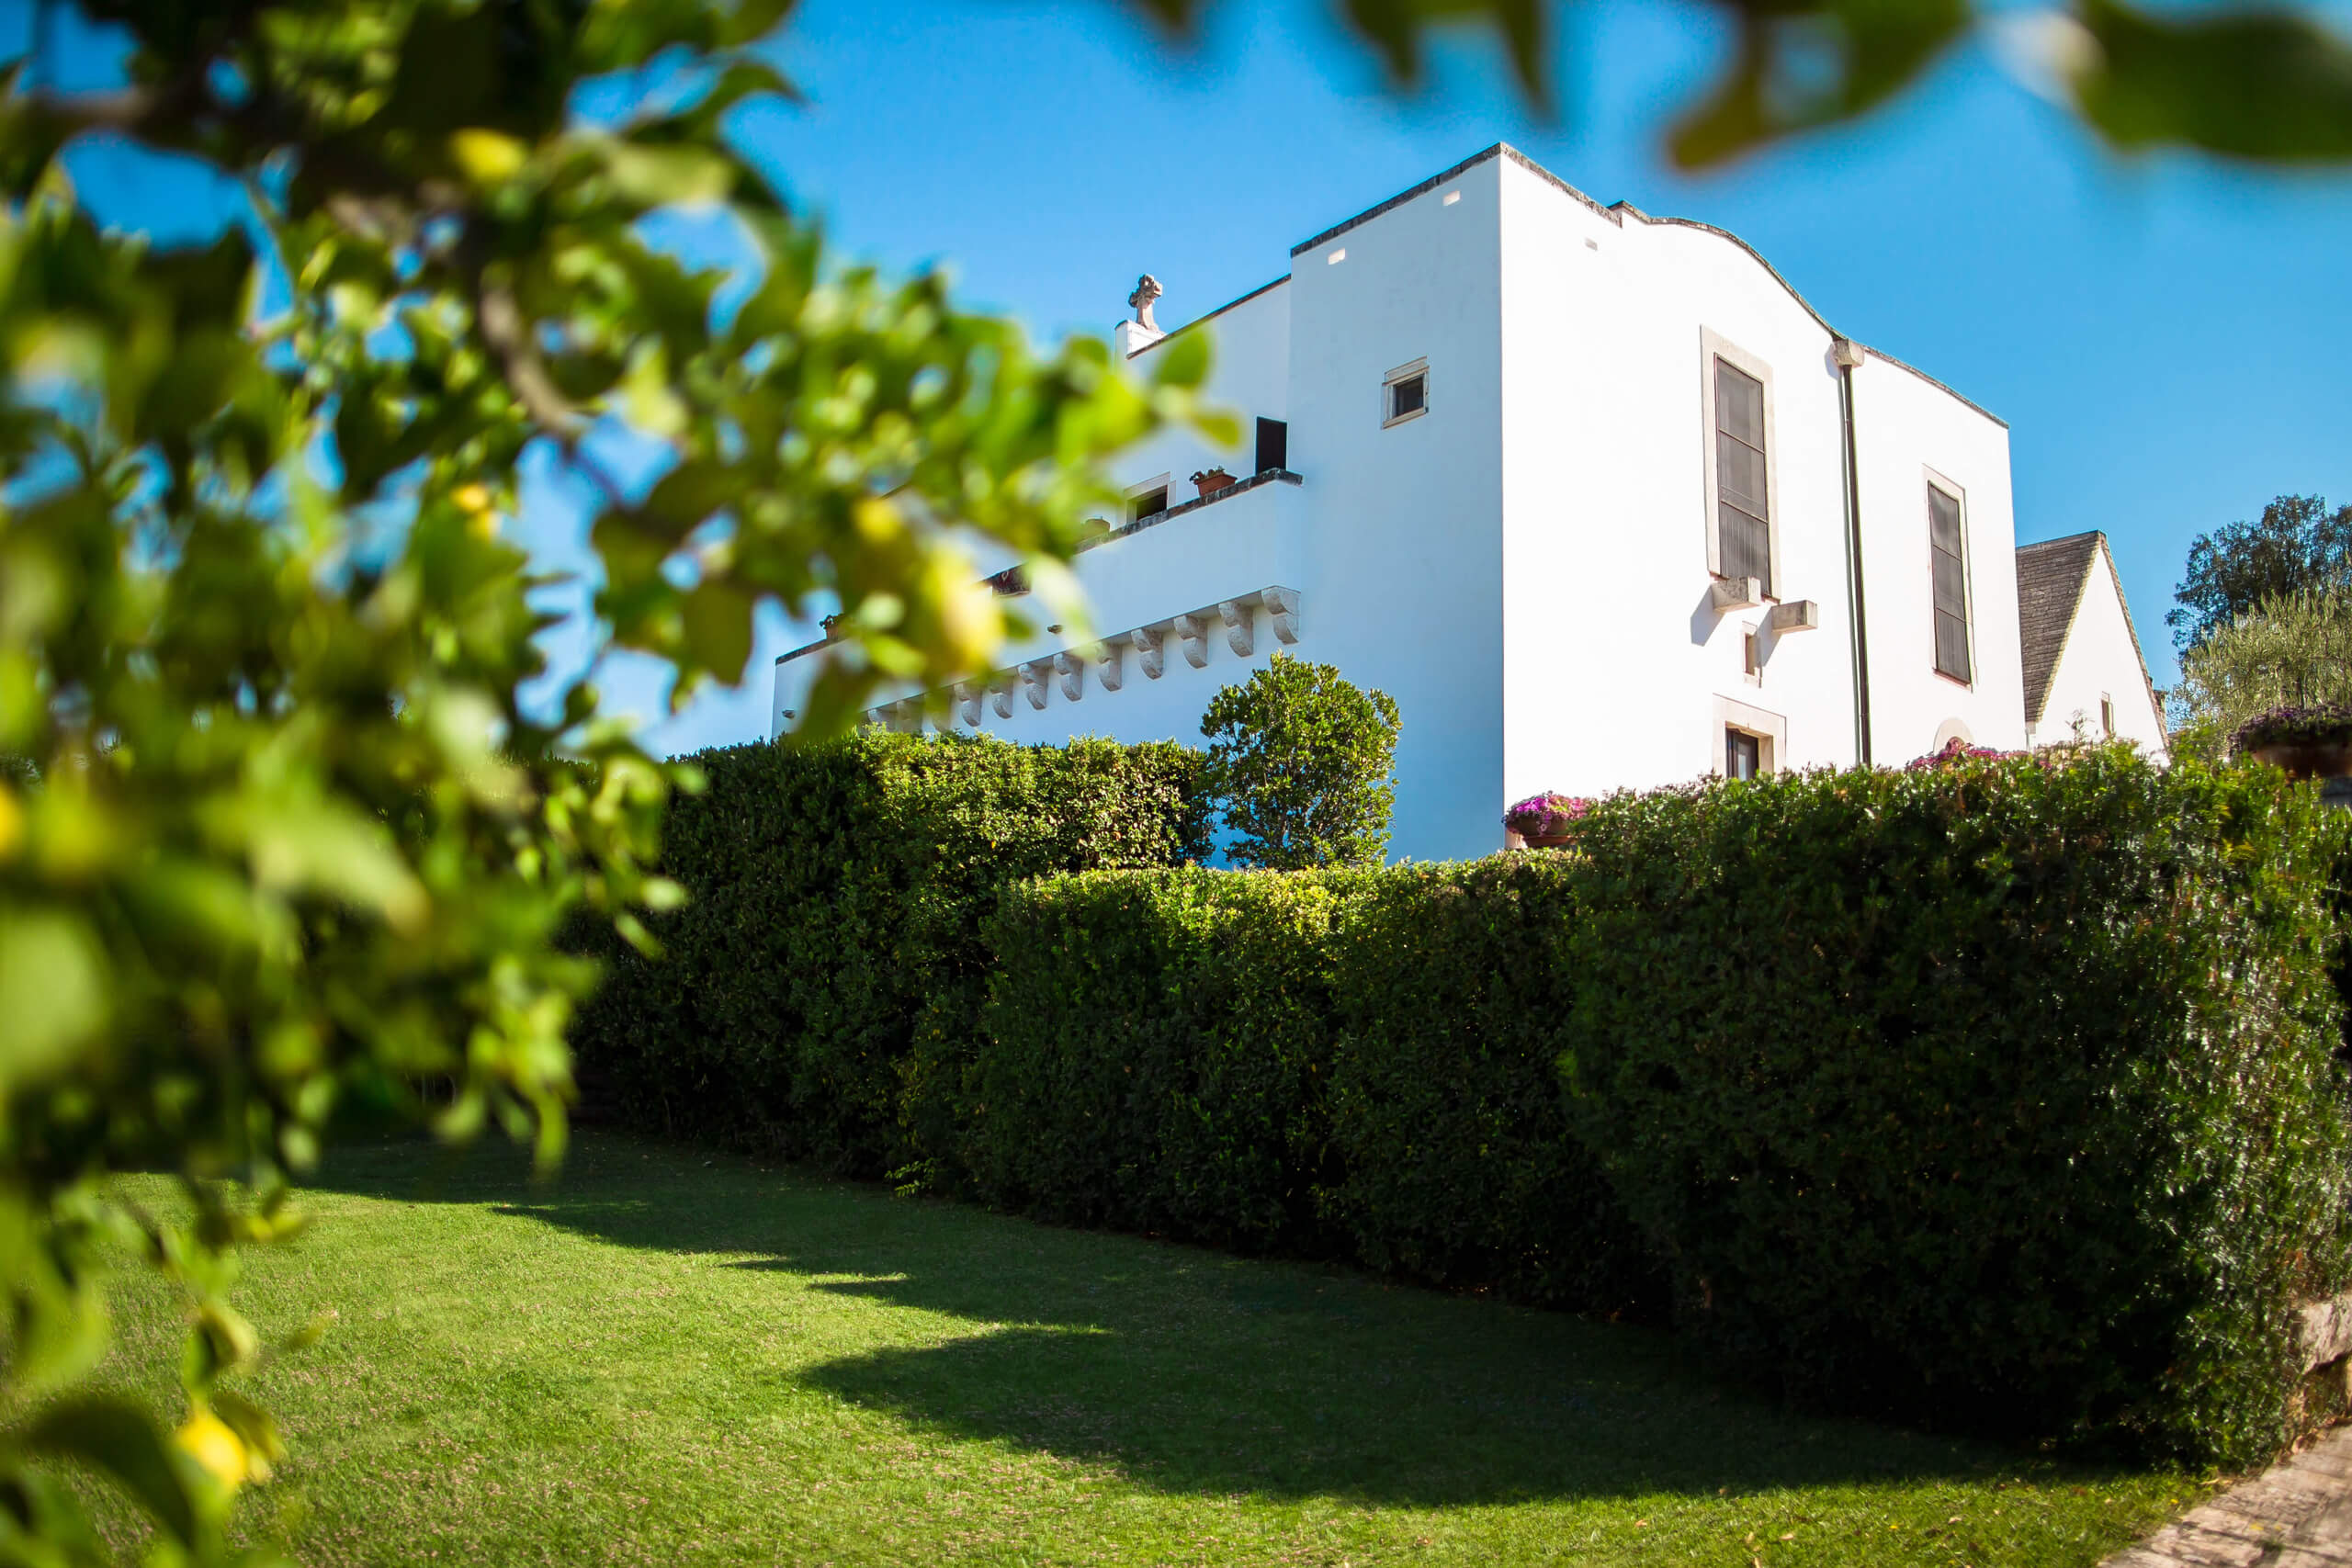 Masseria della Croce lays in the middle of an elegant estate surrounded by nature.